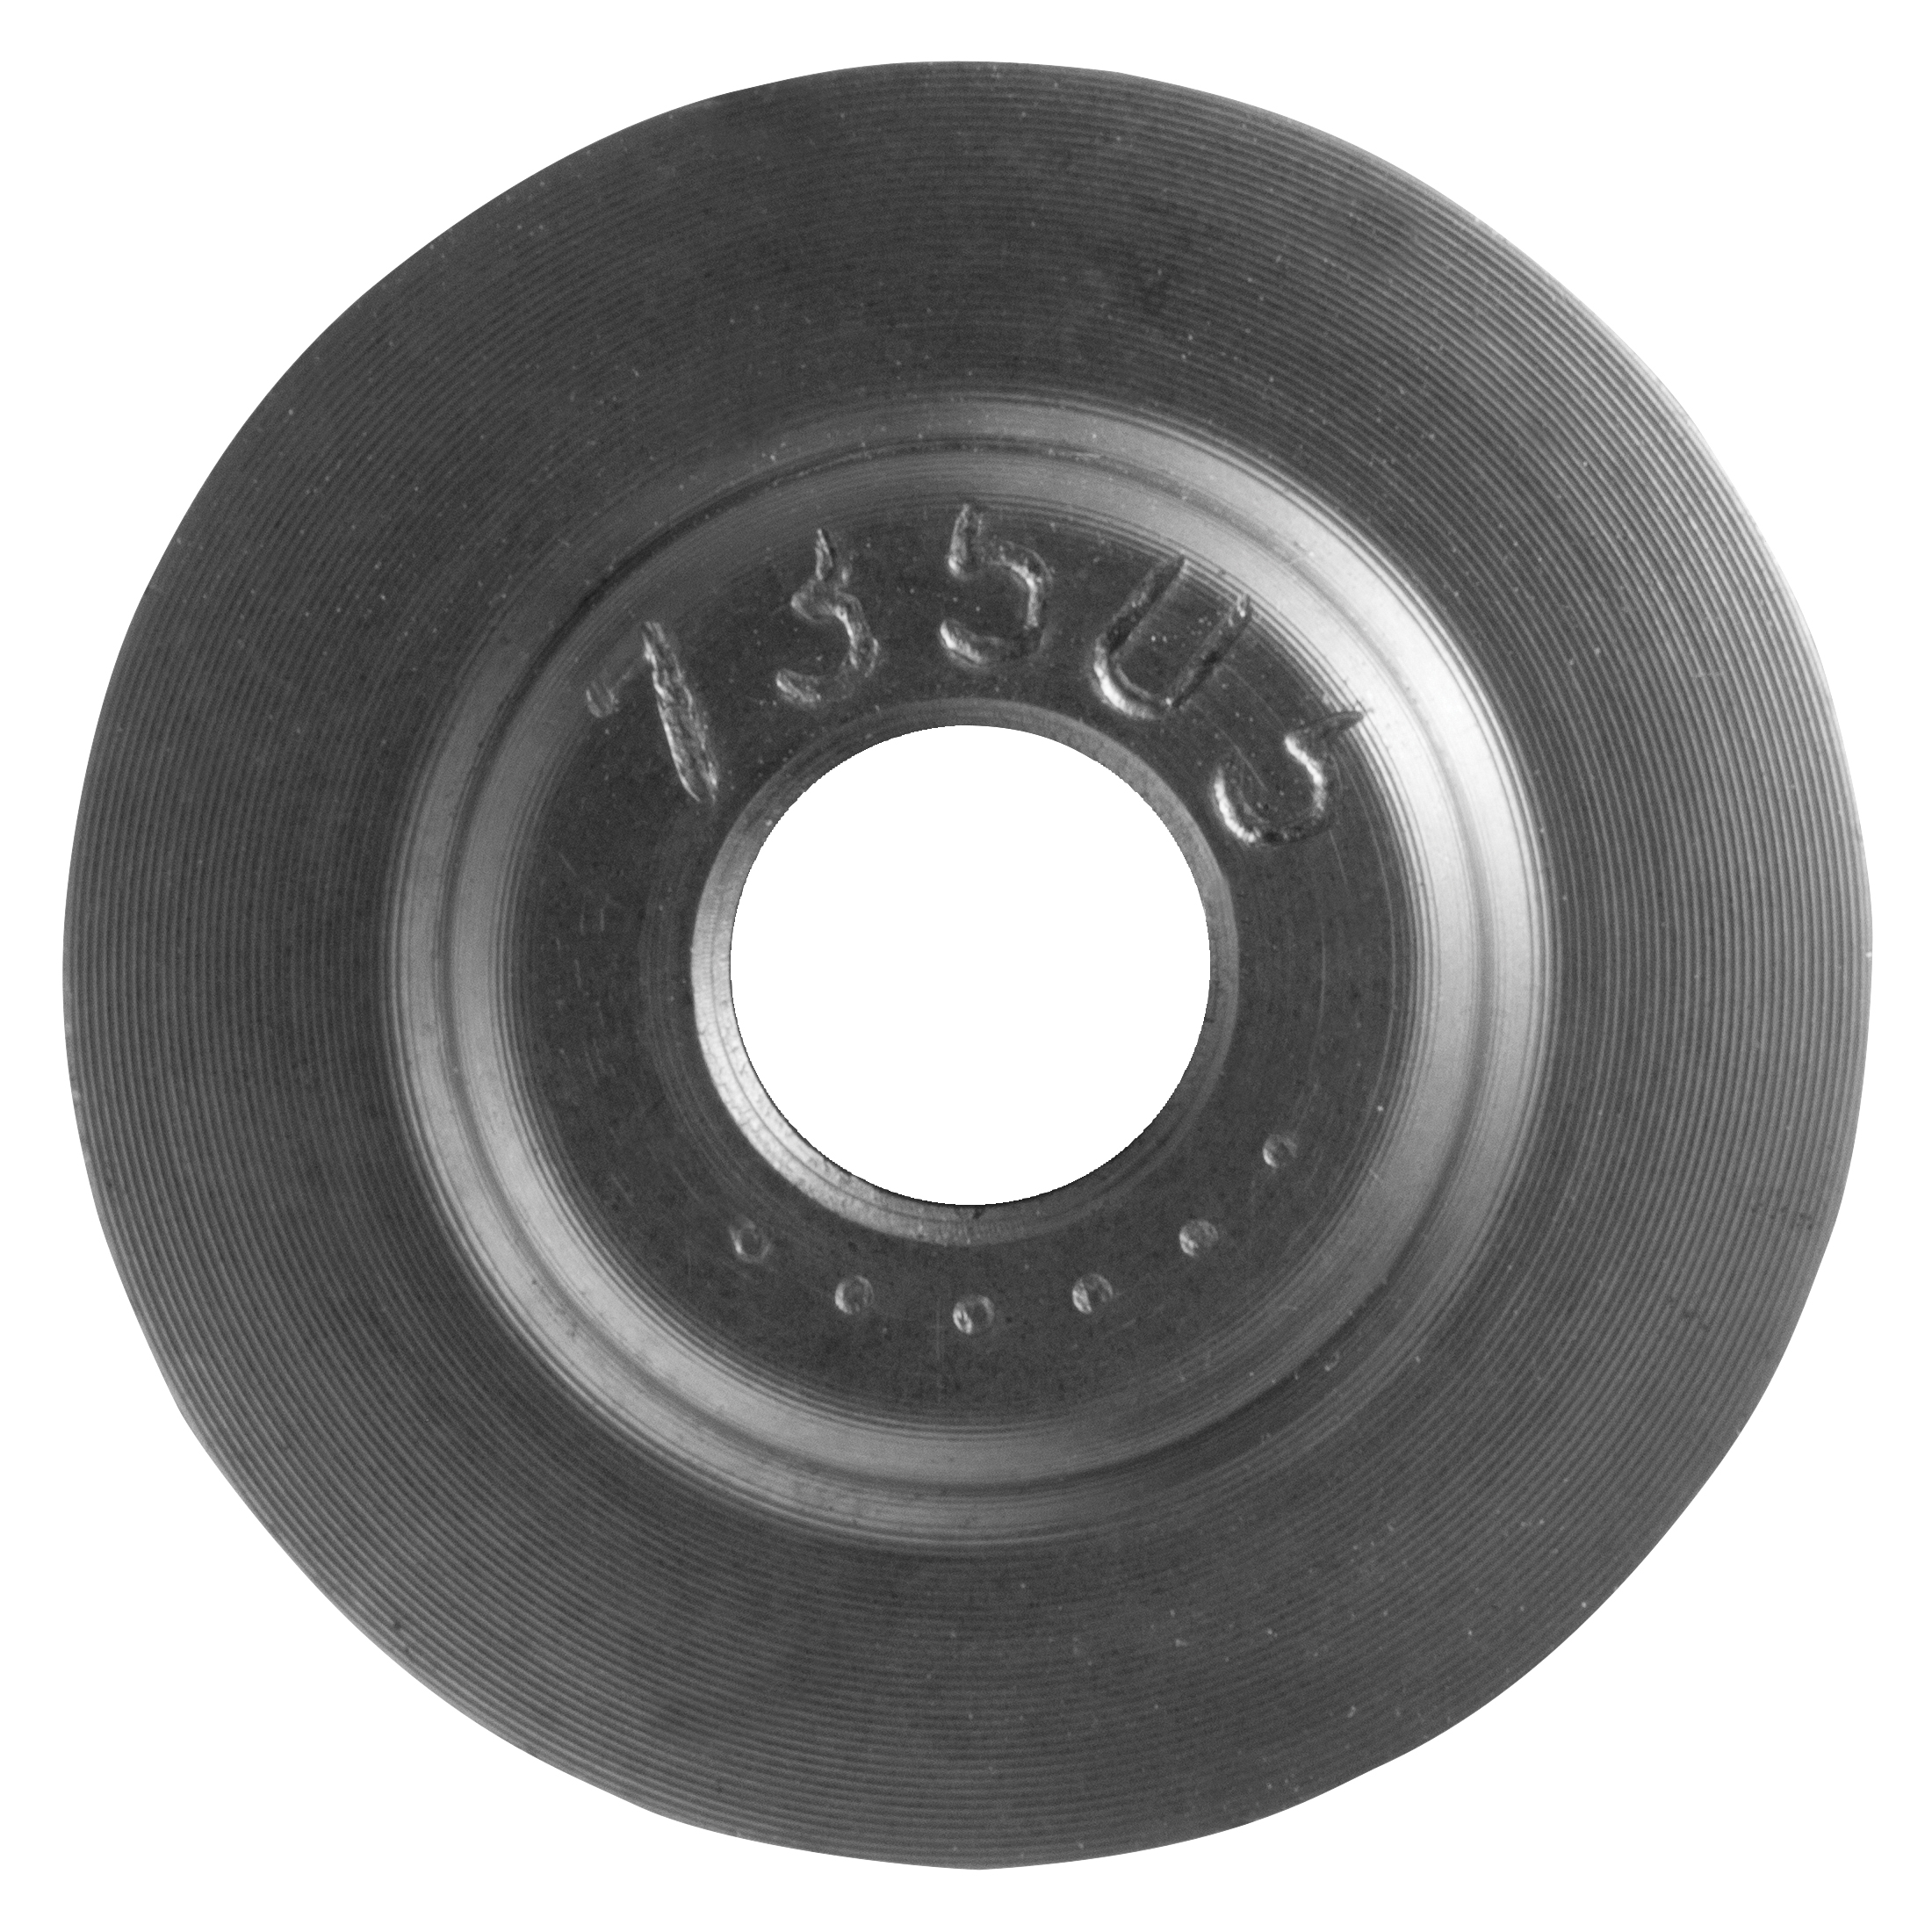 Reed 03690 Cutter Wheel, 0.17 in Blade Exposure, For Use With TC14, TC166 and MC3 Tubing Cutter